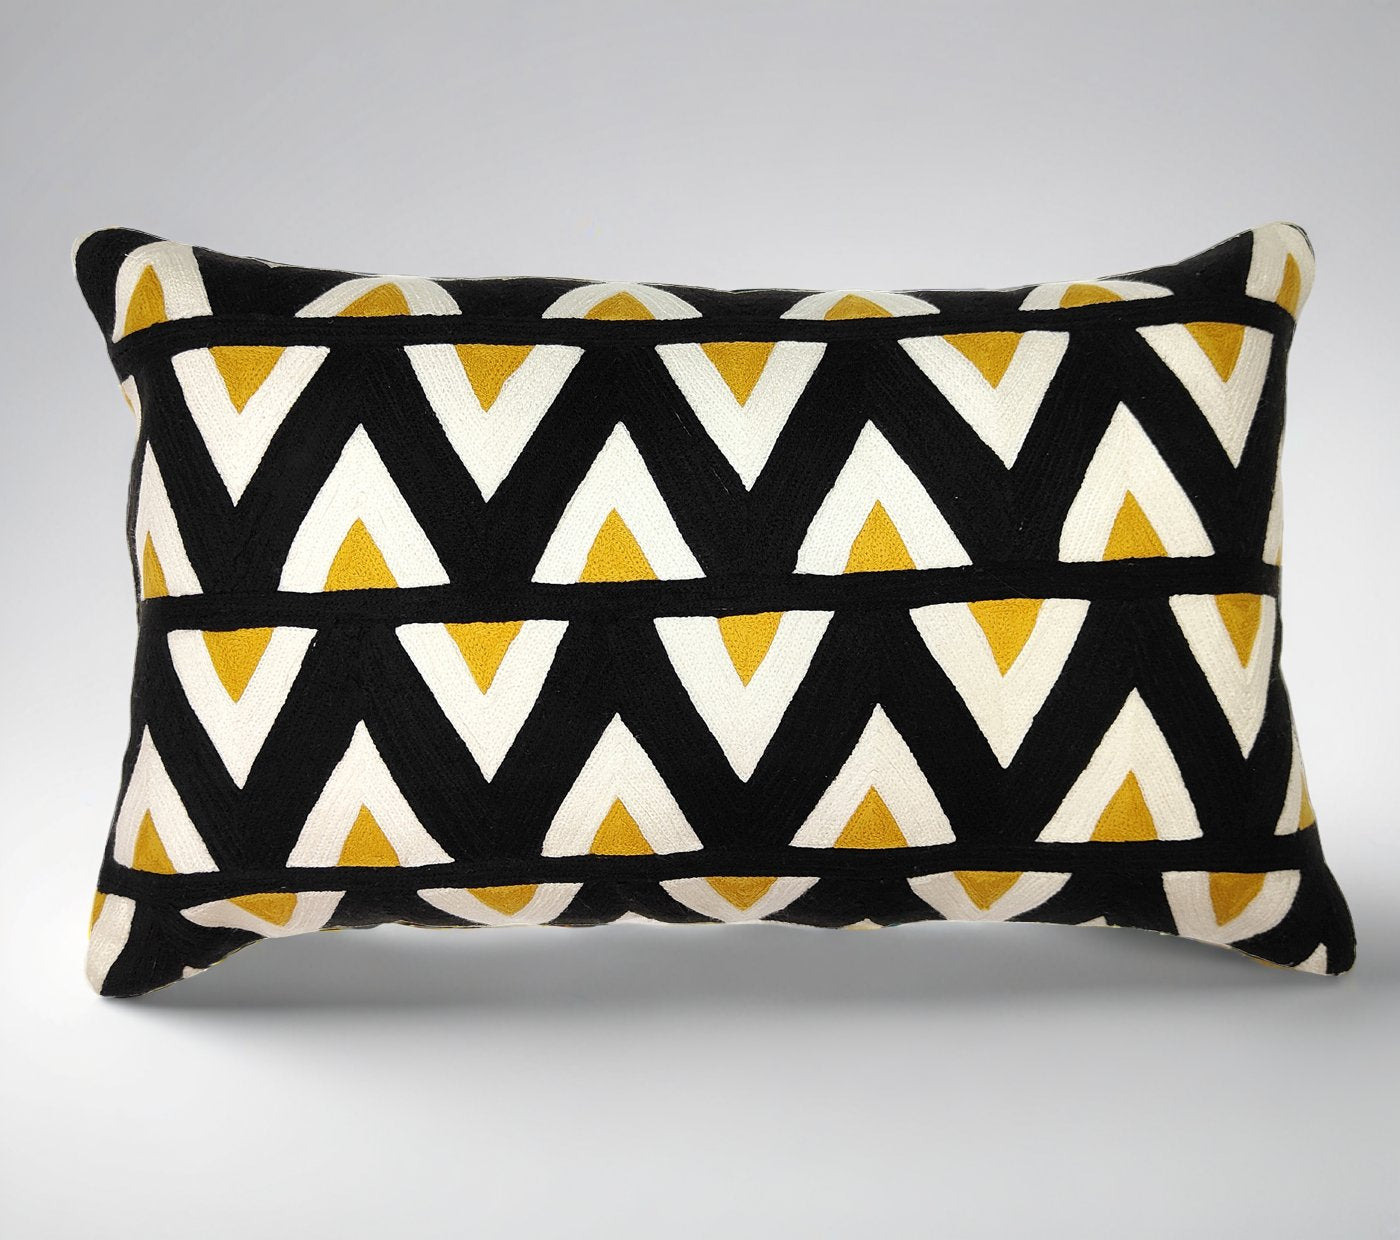 Embroidered Chevron Cushion Cover Size 30X50Cms